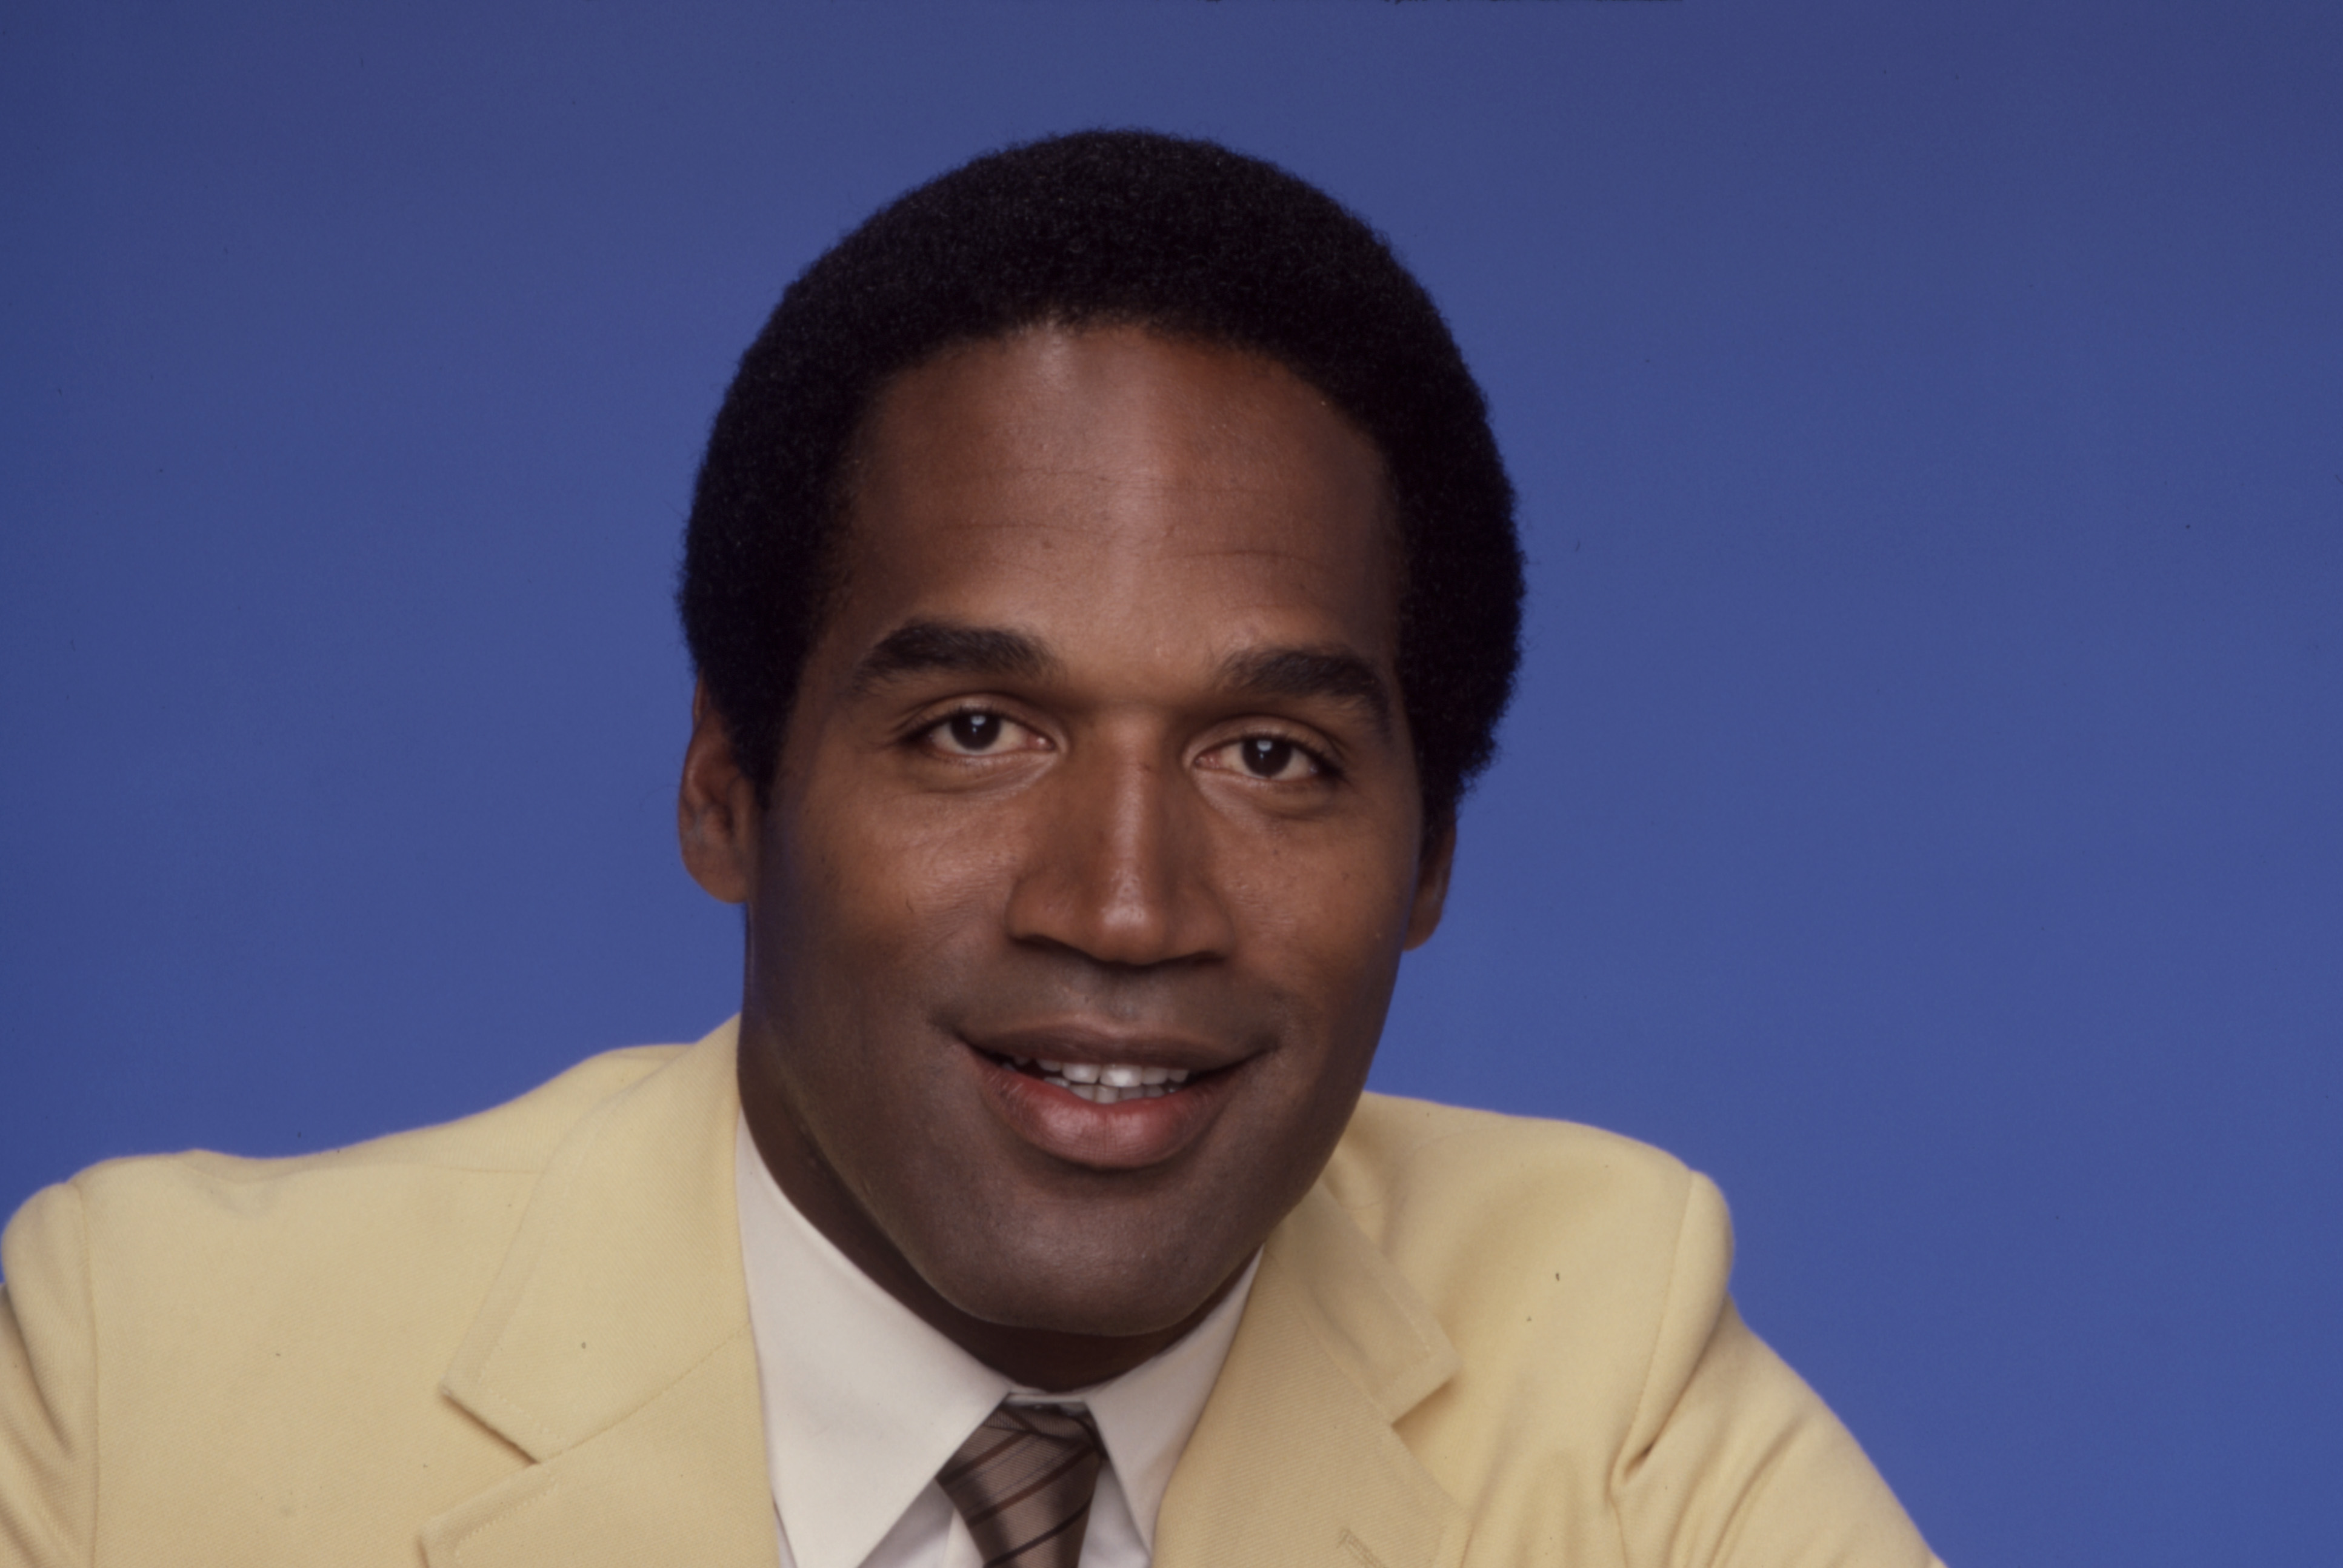 O.J. Simpson in 1983